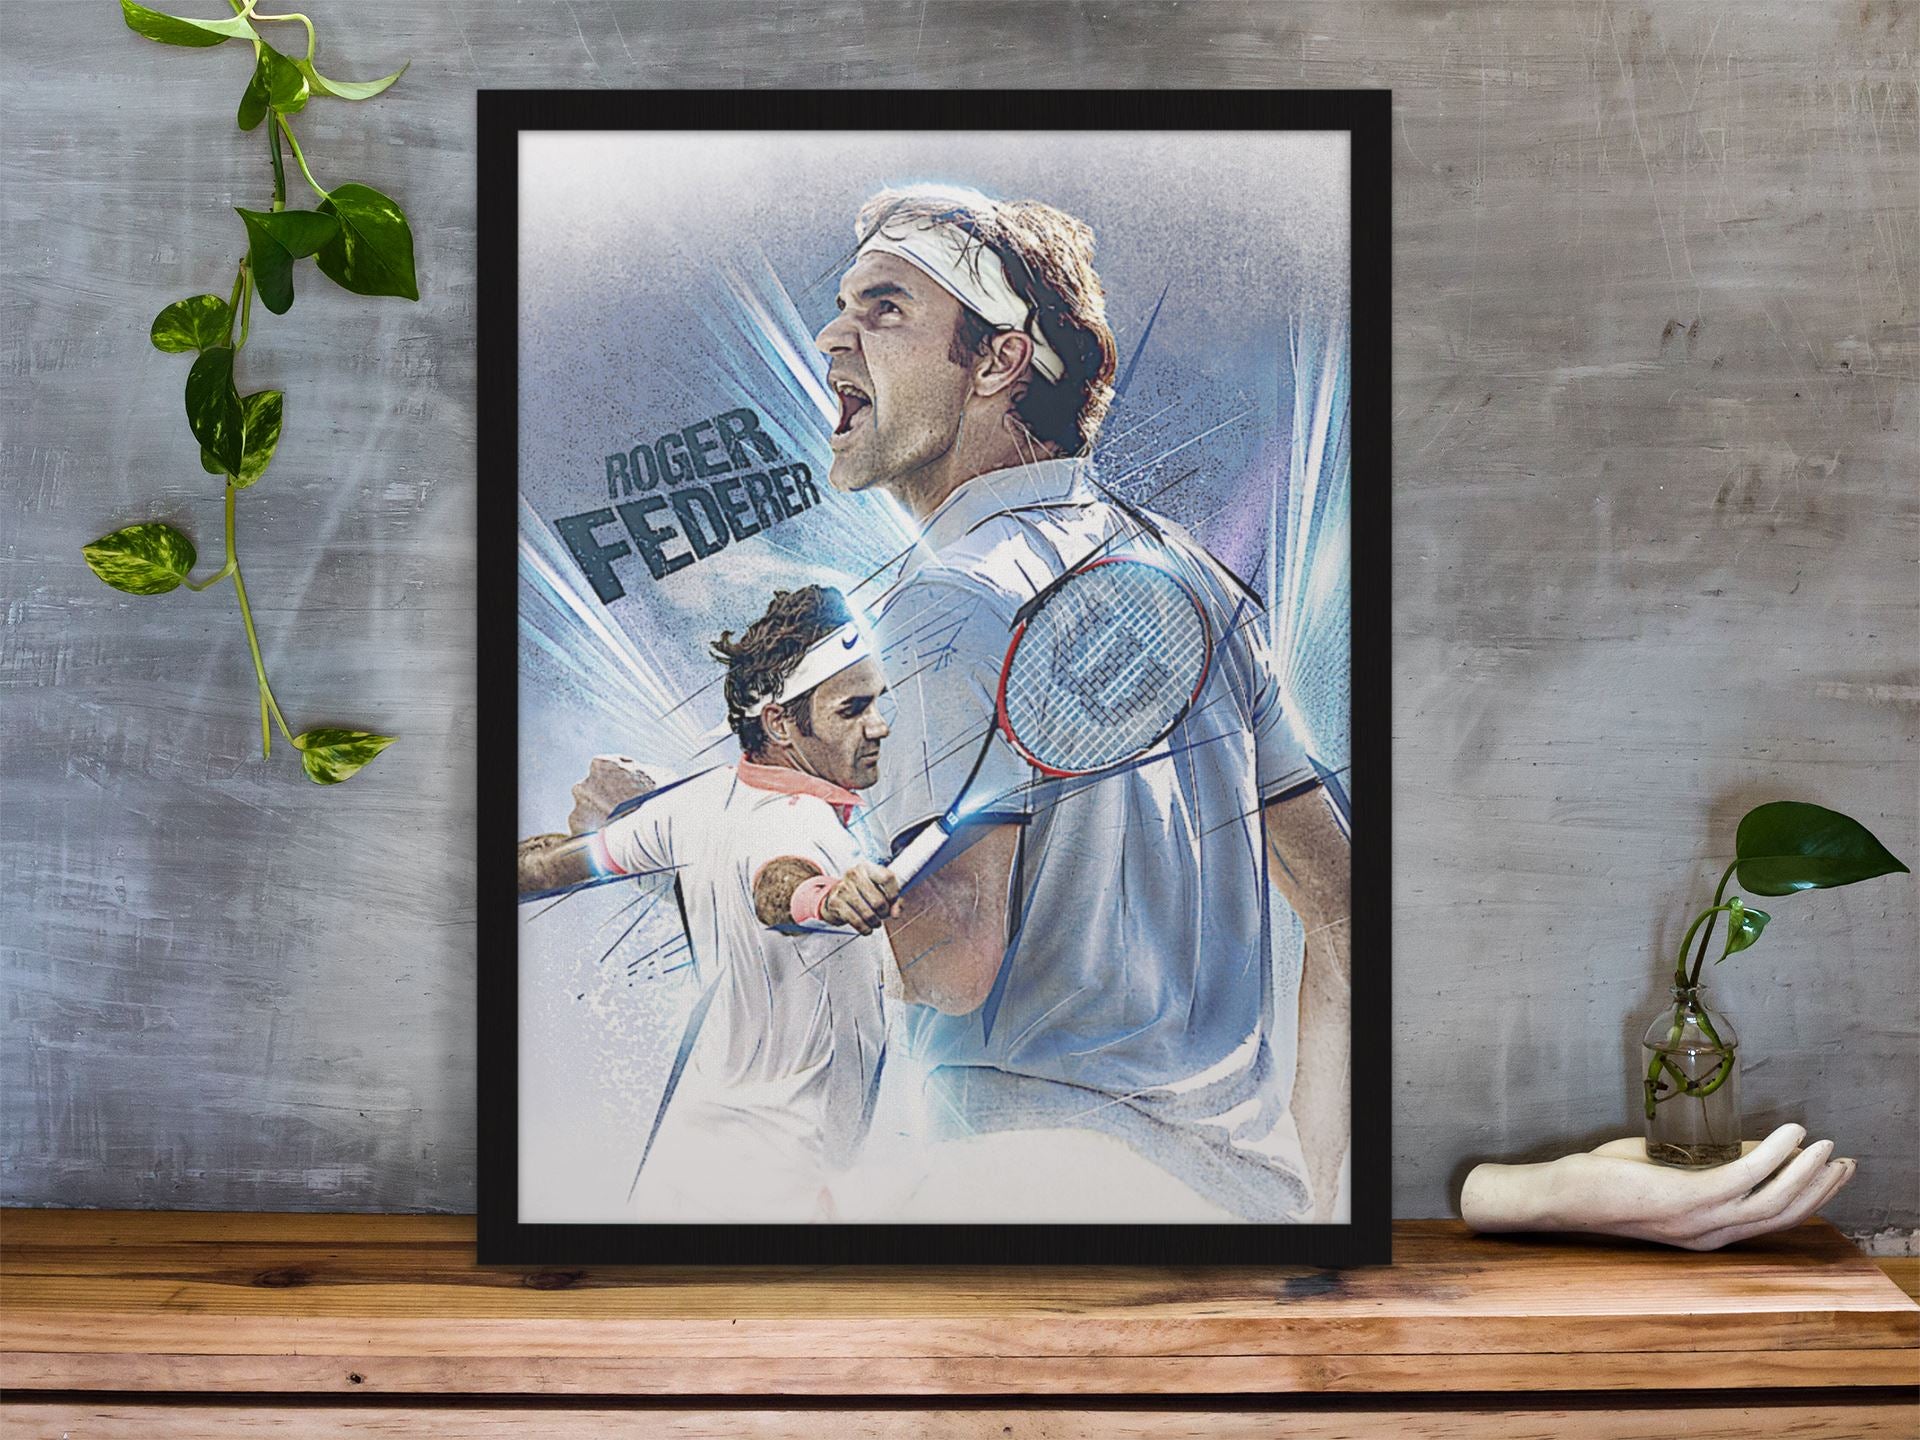 Roger Federer Exclusive Wall Poster for Tennis Fans freeshipping - Catch My Drift India